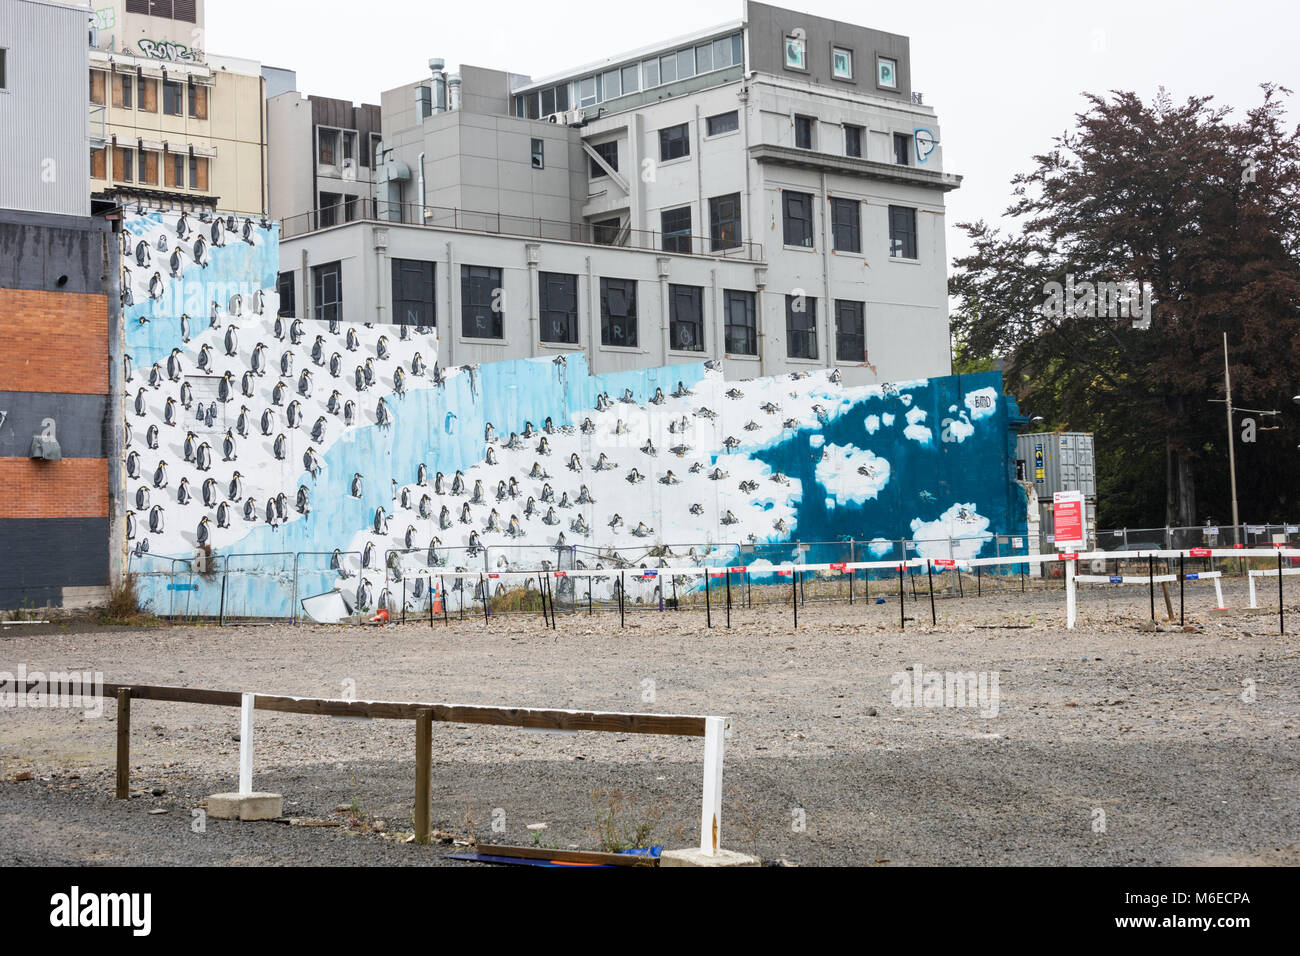 Parking lots after Building Demolition following Earthquake, Christchurch, New Zealand Stock Photo